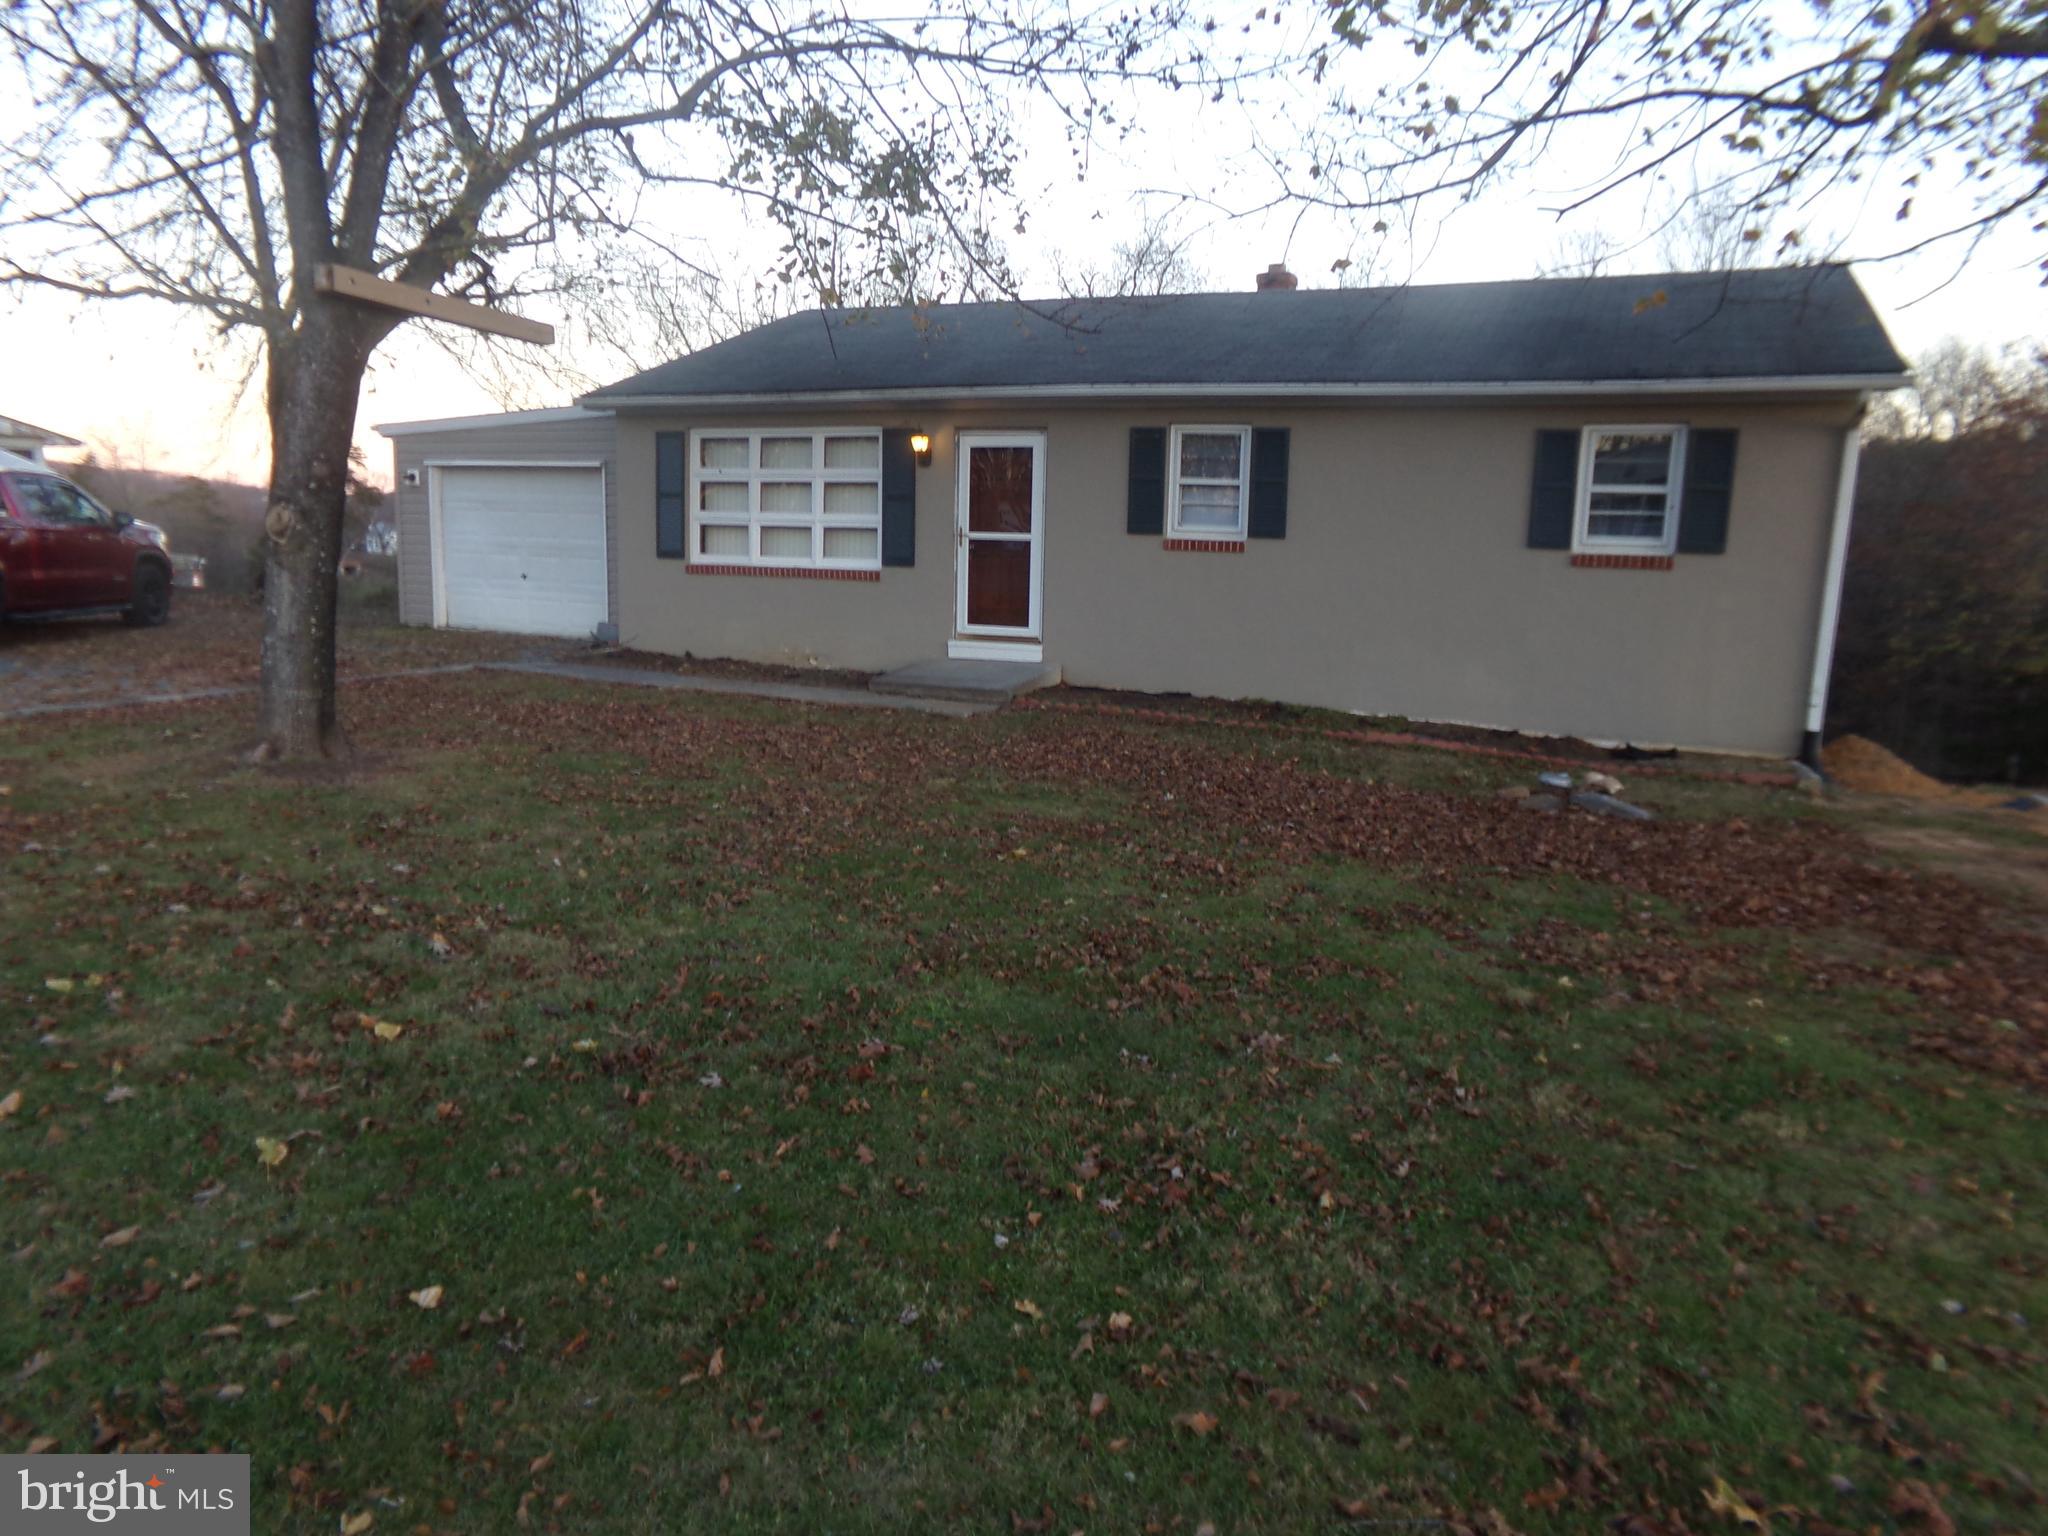 RAMBLER WITH HARDWOOD FLOORS, UNFINISHED BASEMENT, GARAGE AND LARGE DECK LOCATED ON 1 ACRE LOT. VACA